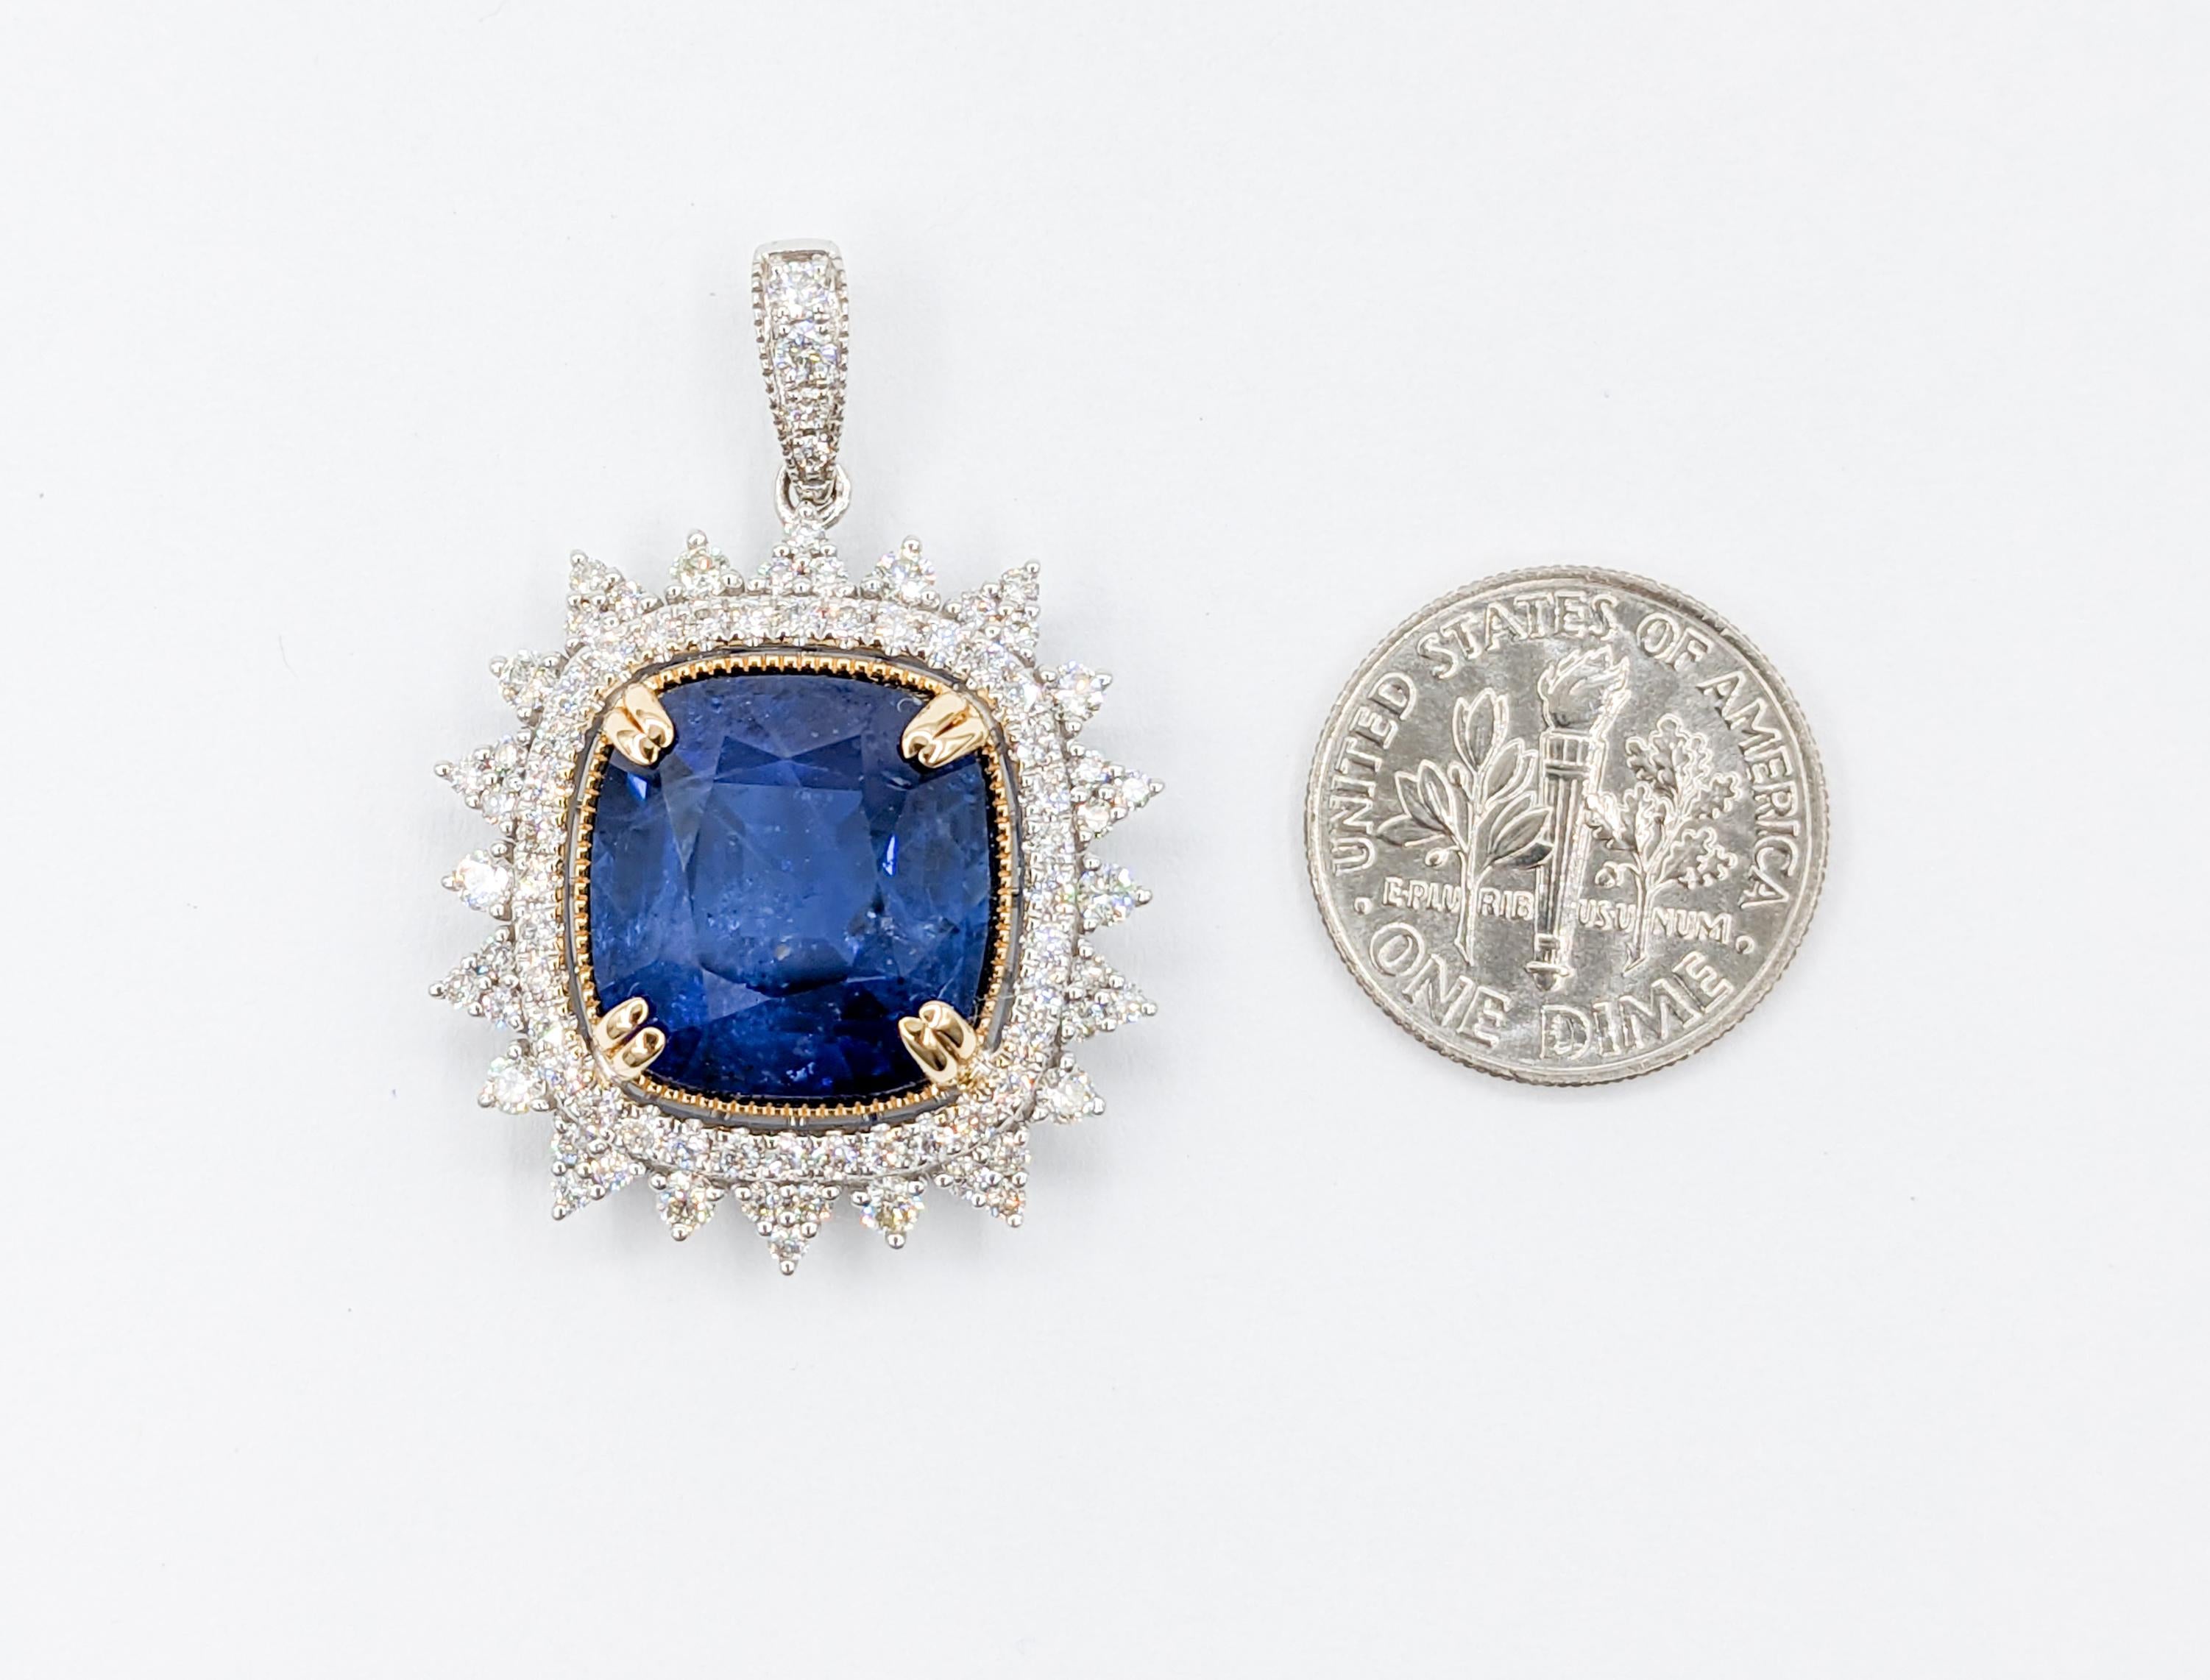 Stunning 14.2ct Sapphire Pendant with Diamond Halo in 14kt White Gold For Sale 1